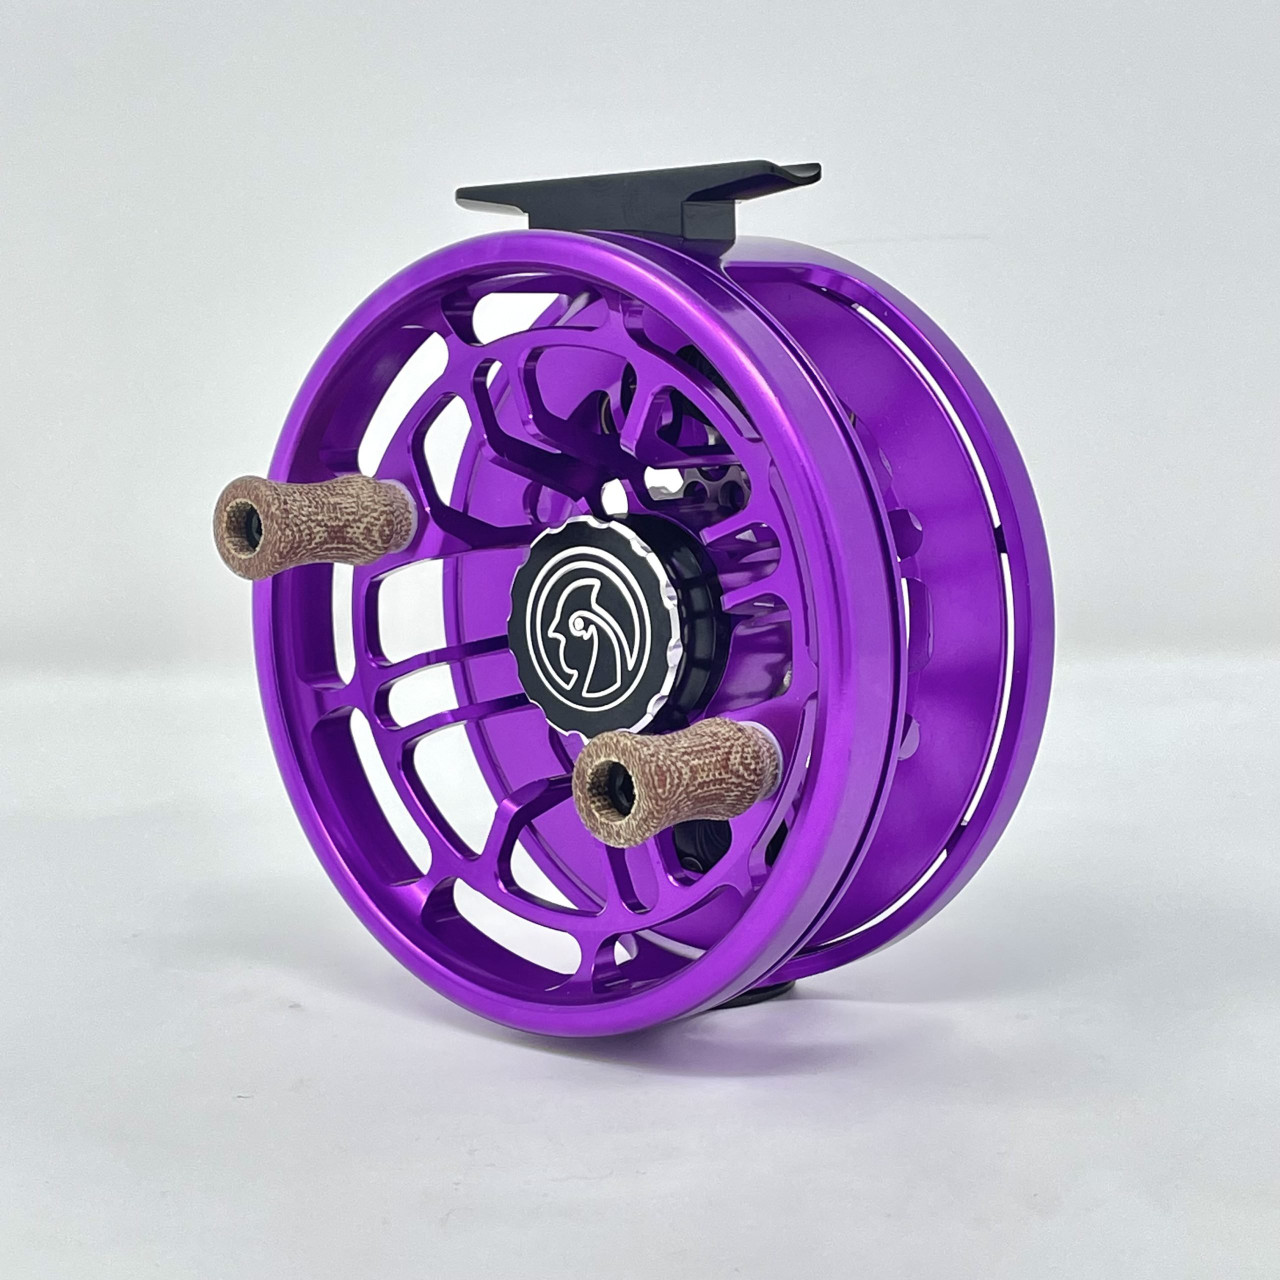 Fair Chase G2 Click Prawl Fly Reel Purple/Purple59420 - Gordy & Sons  Outfitters